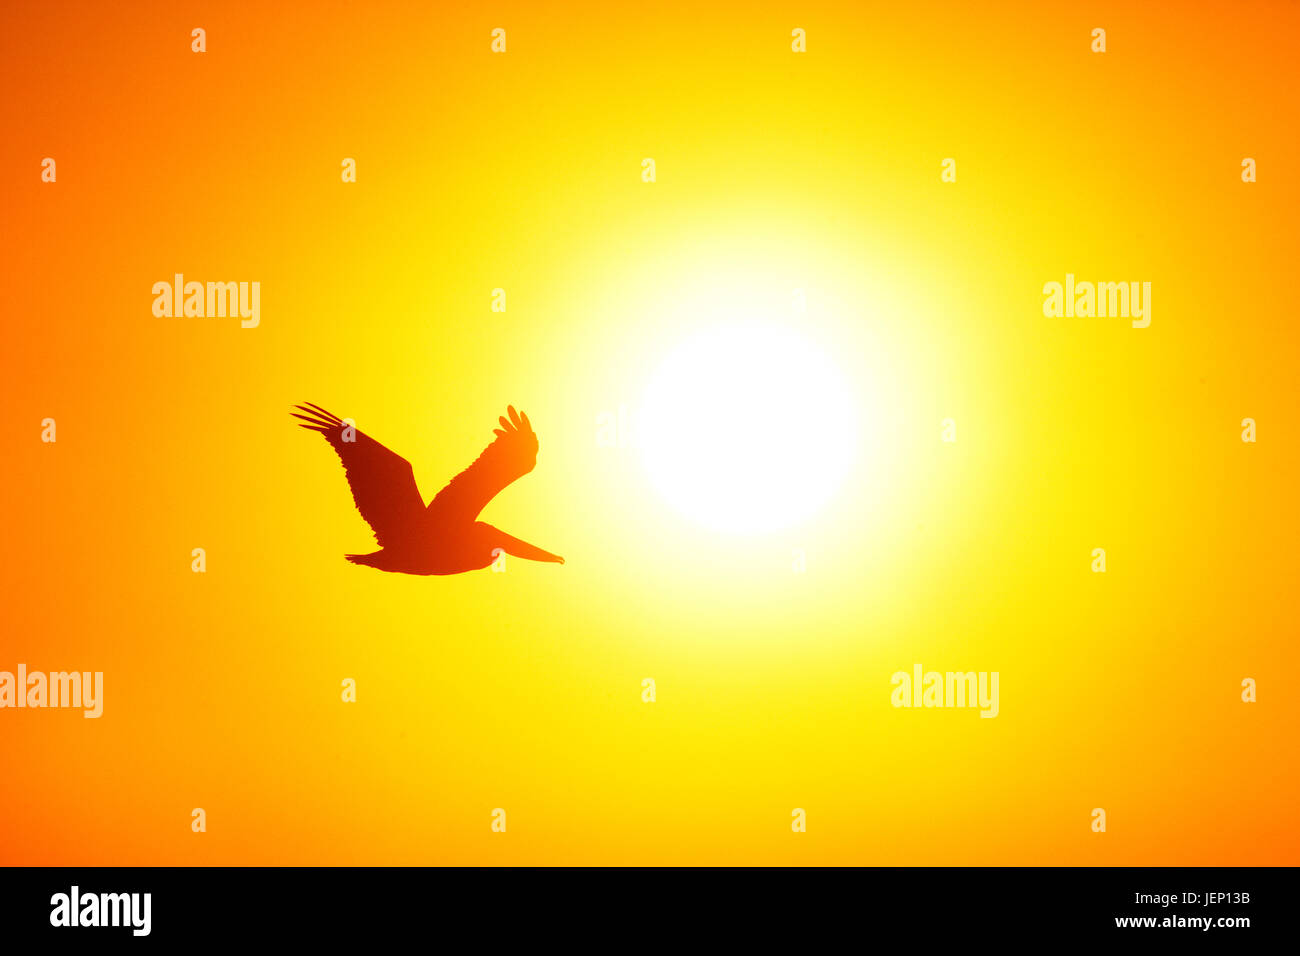 Silhouette of bird flying at sunset Stock Photo